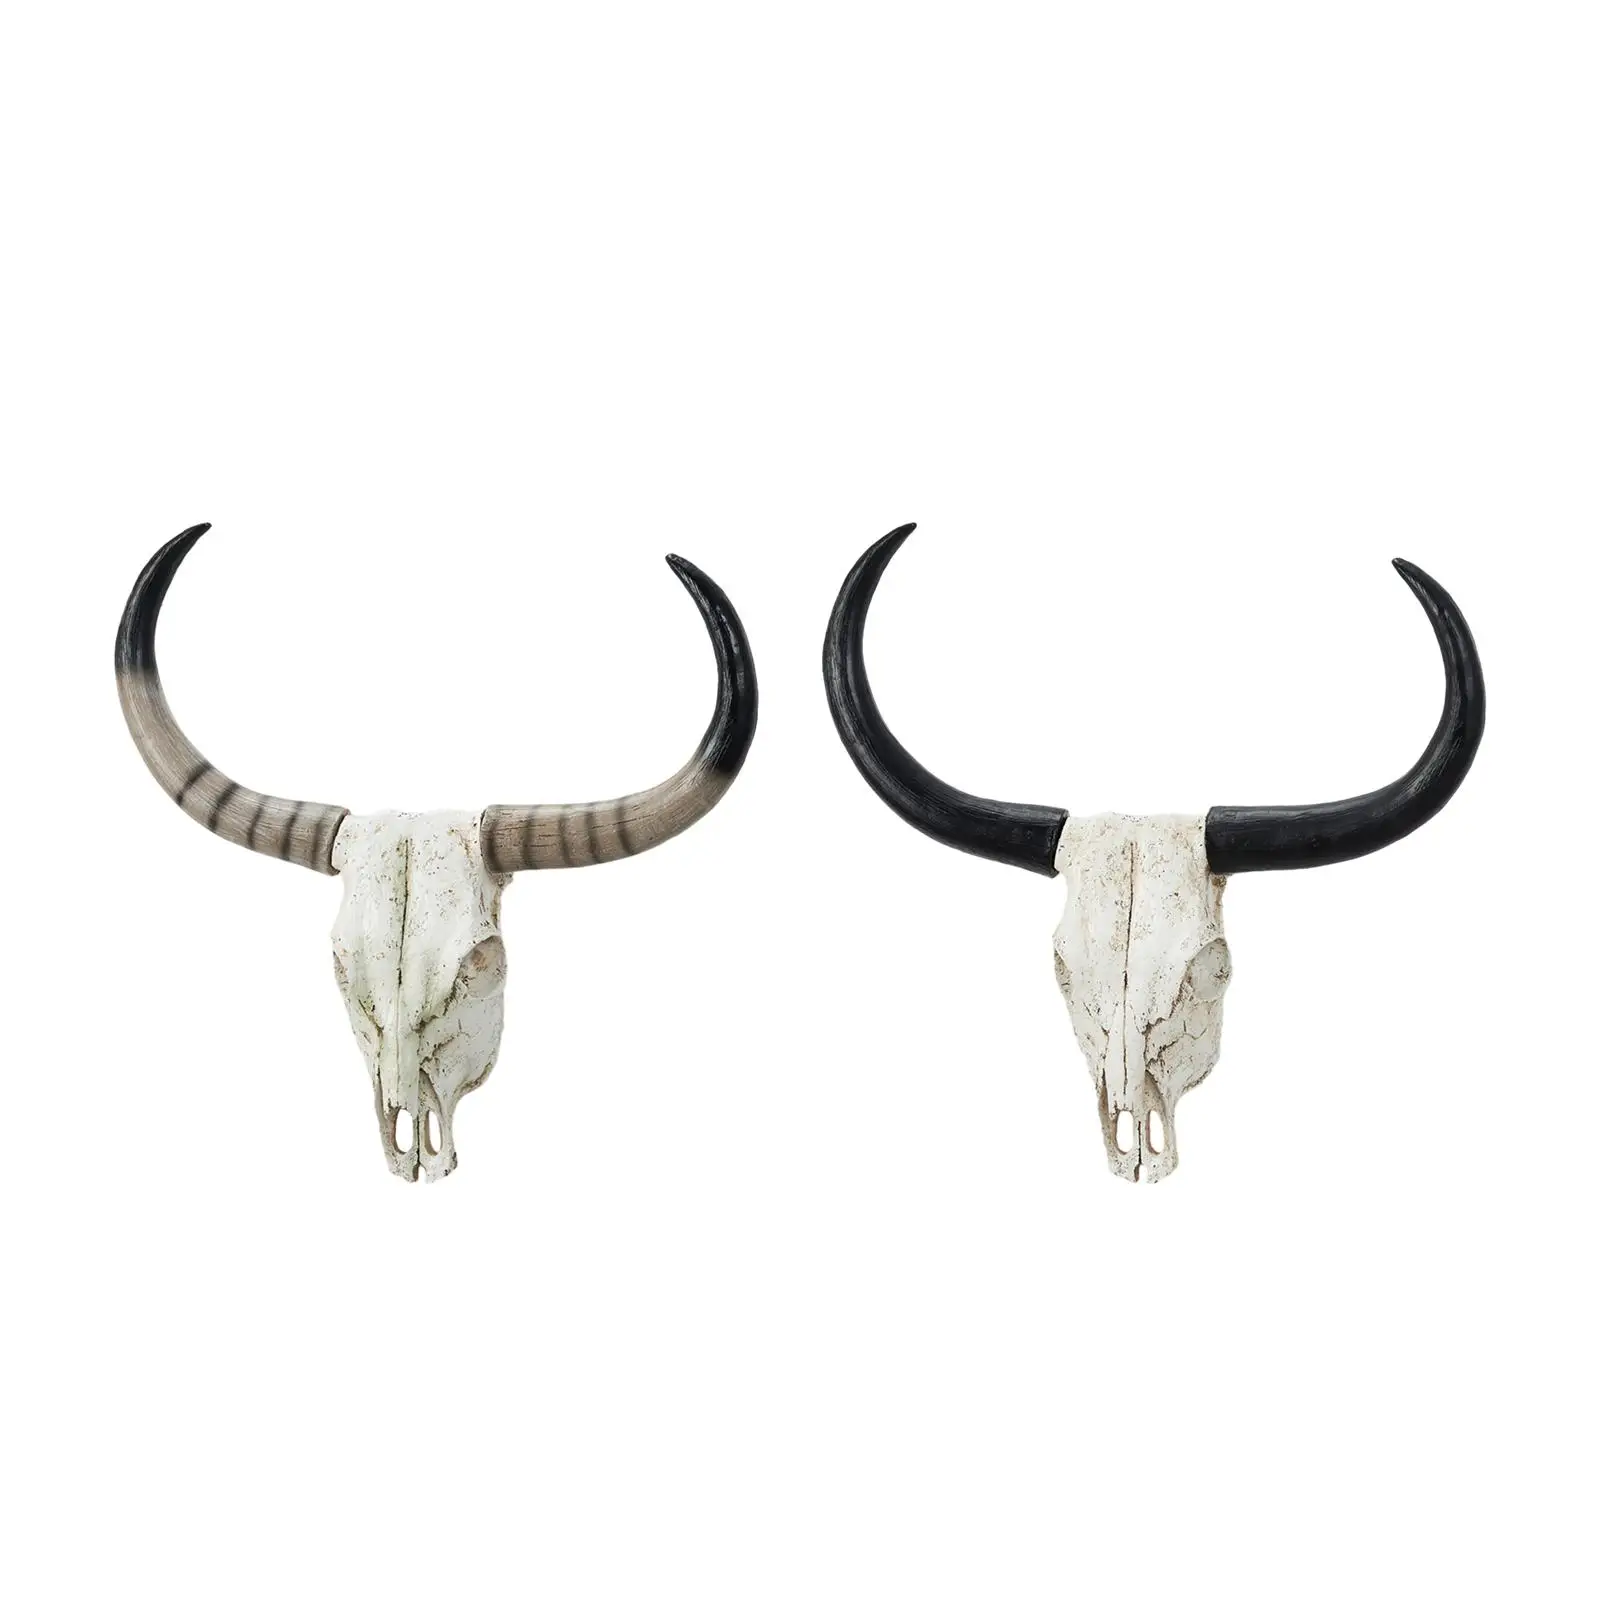 

Long Horn Cow Skull Wall Sculpture Animals Heads Wall Decor for Cabinet Home